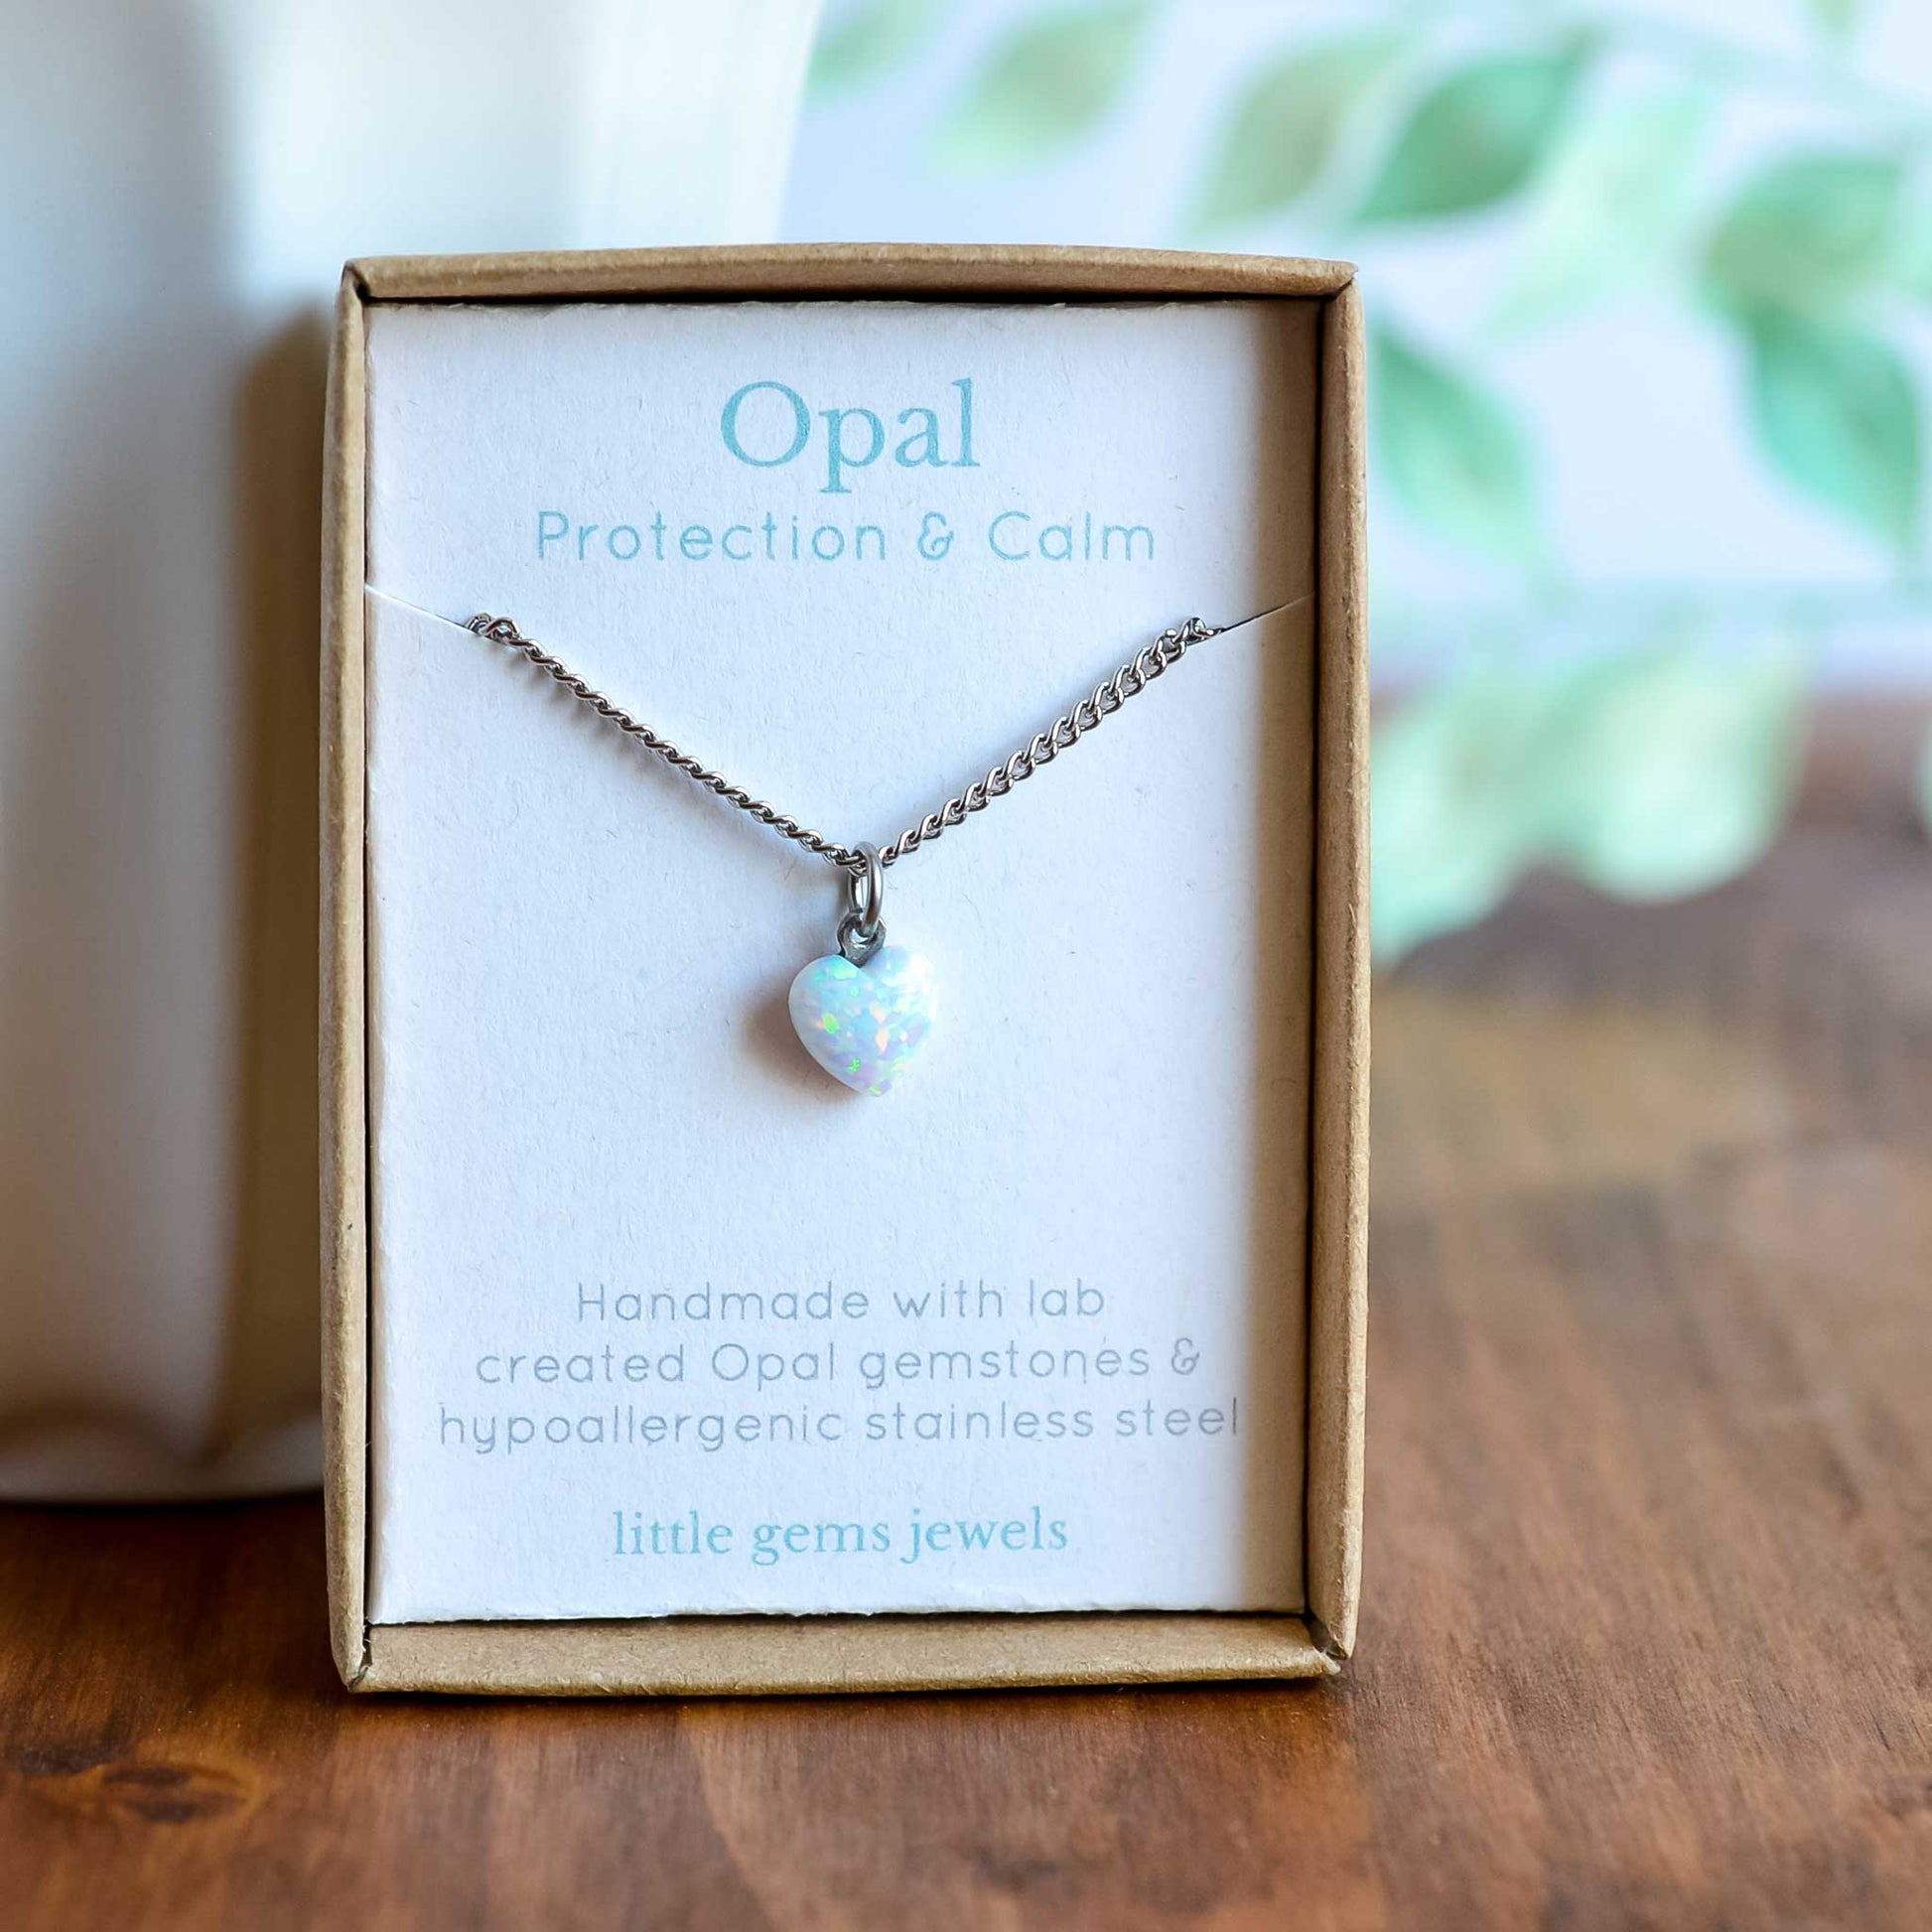 White lab created Opal heart pendant necklace in gift box